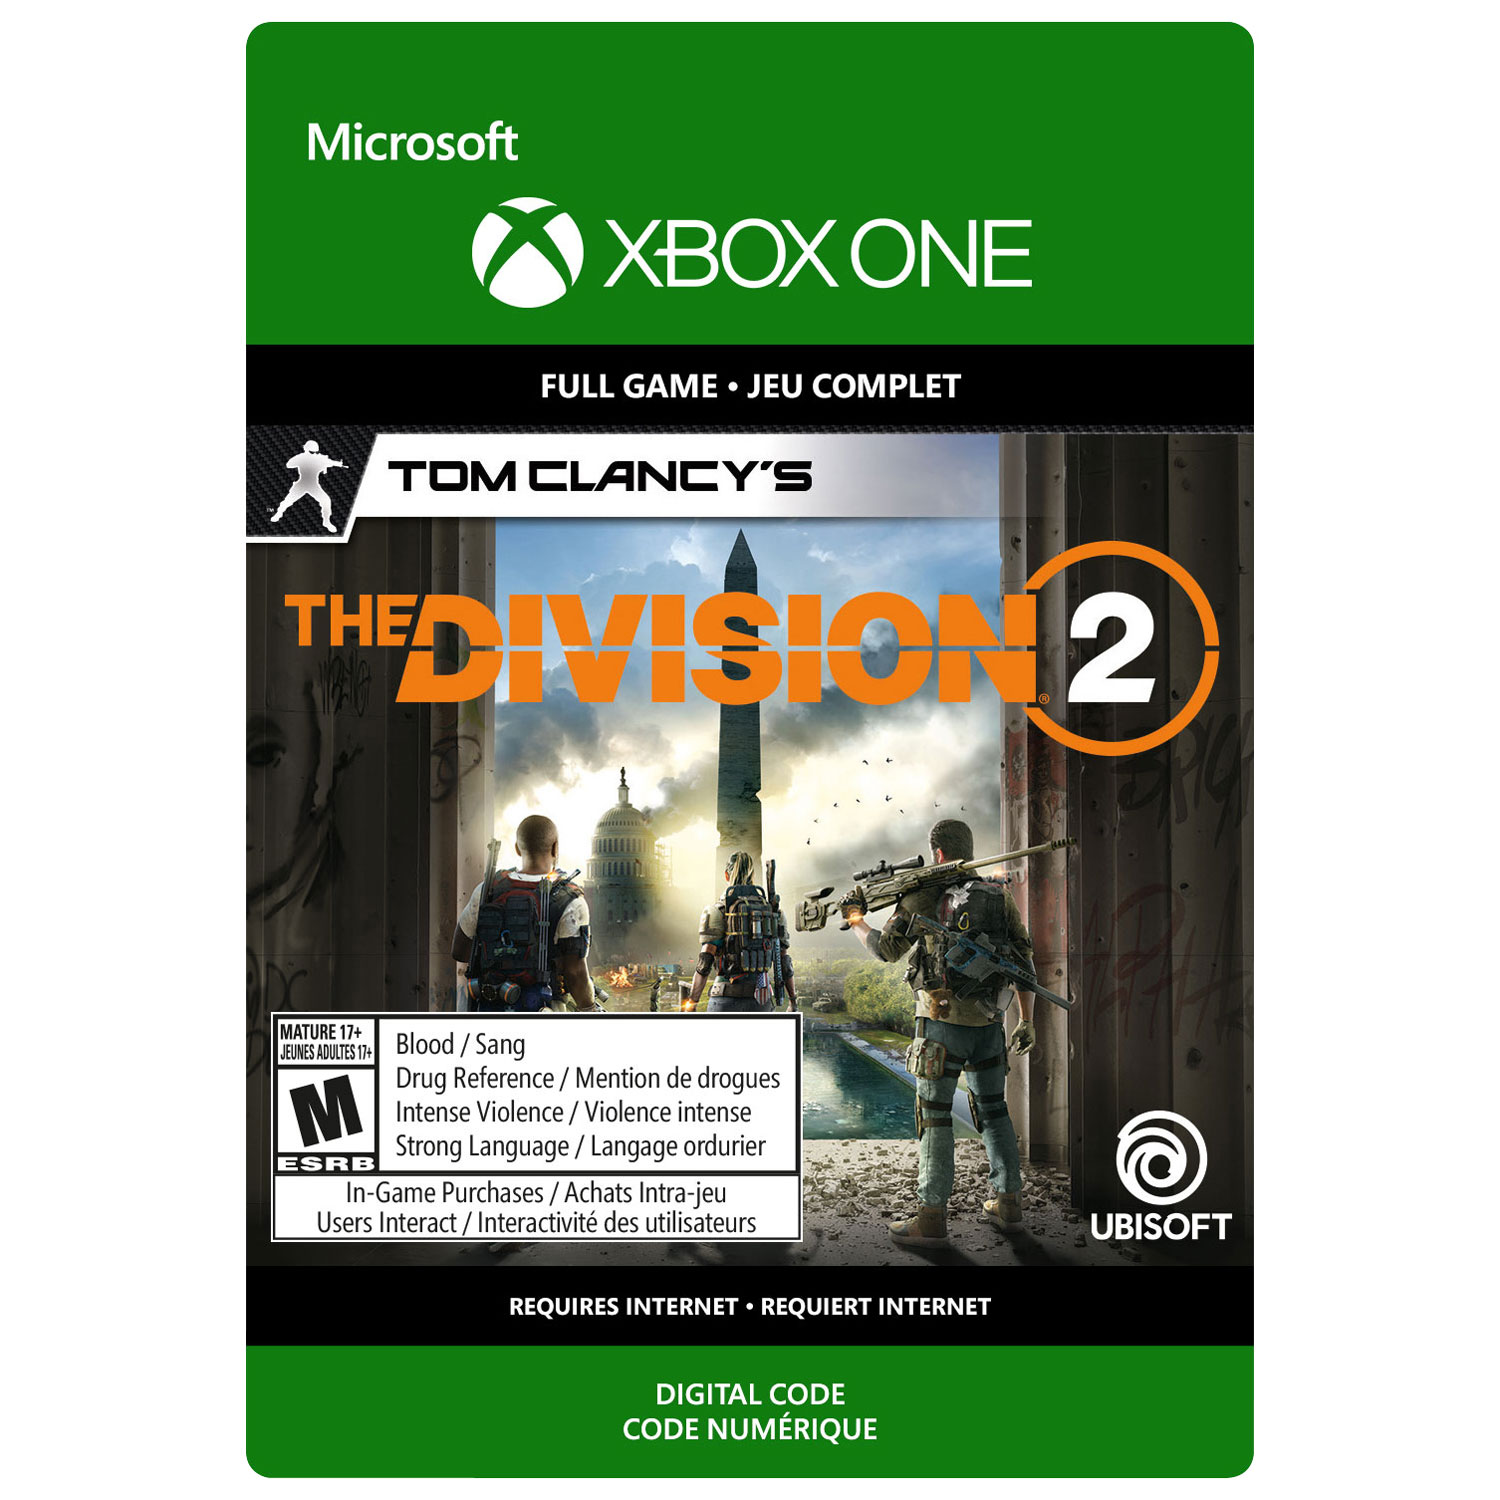 Tom Clancy's The Division 2 (Xbox One) - Digital Download